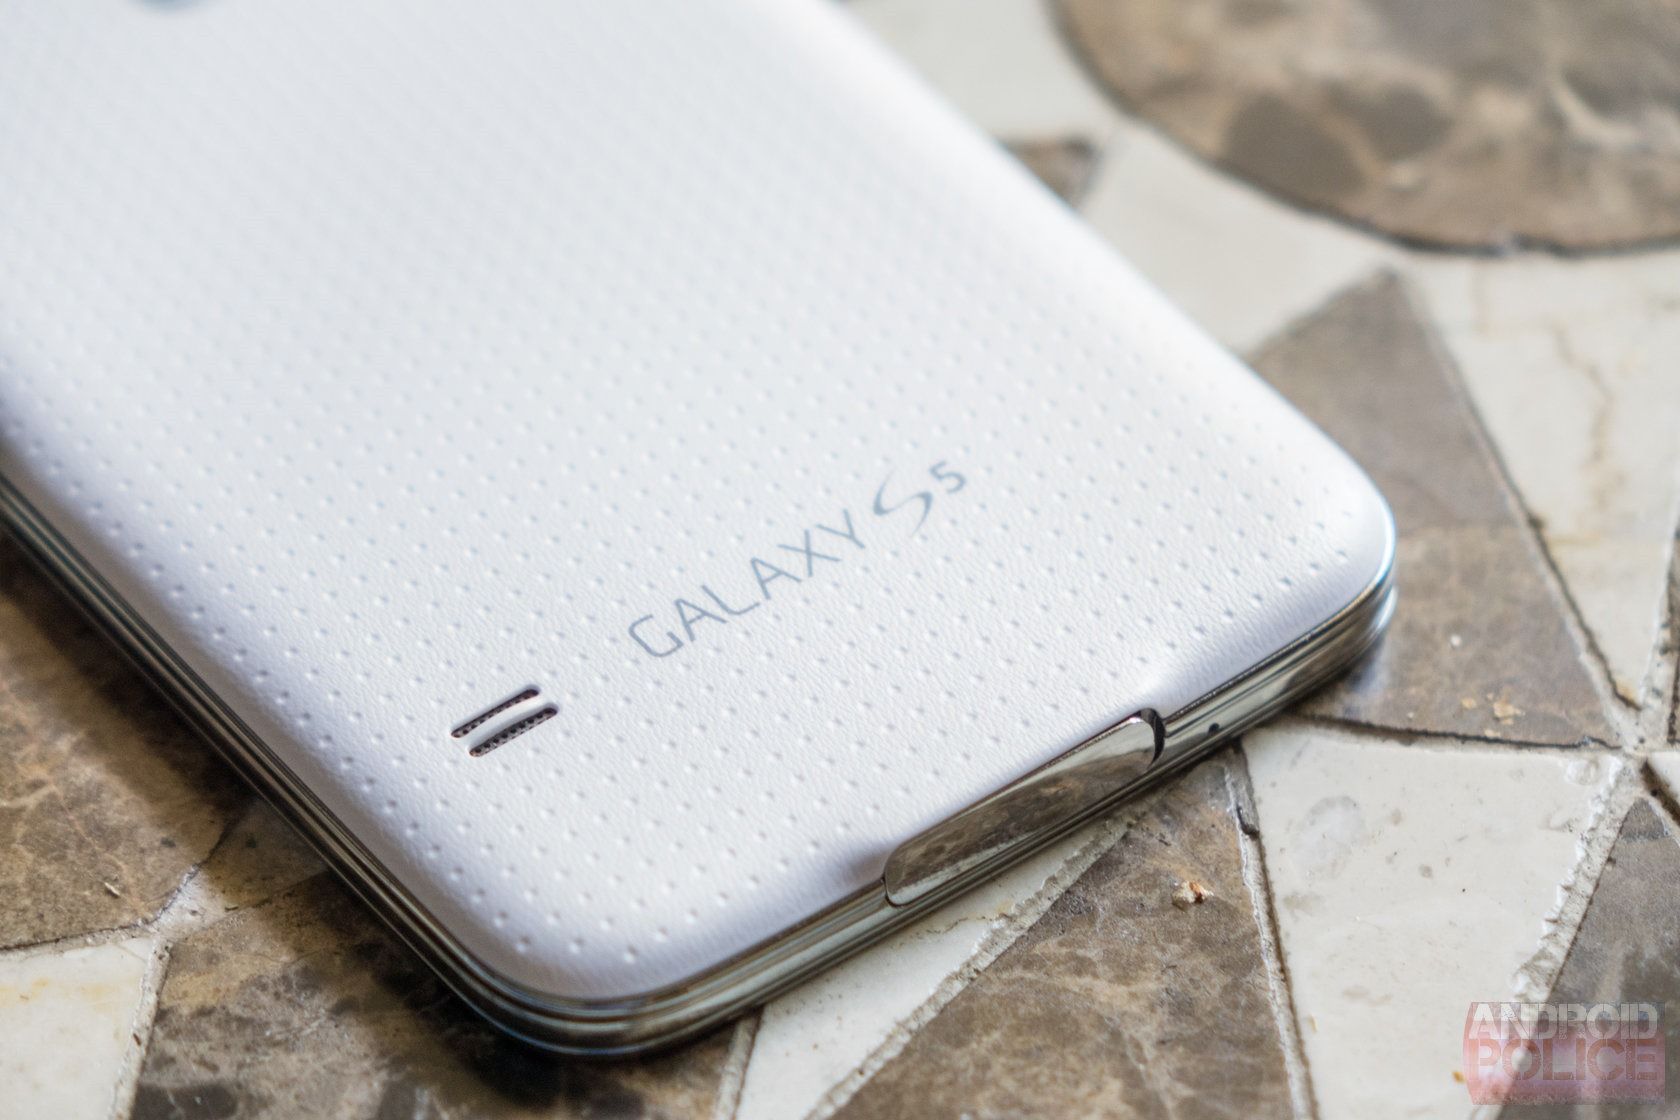 7 reasons the Samsung Galaxy S5 was great for its time